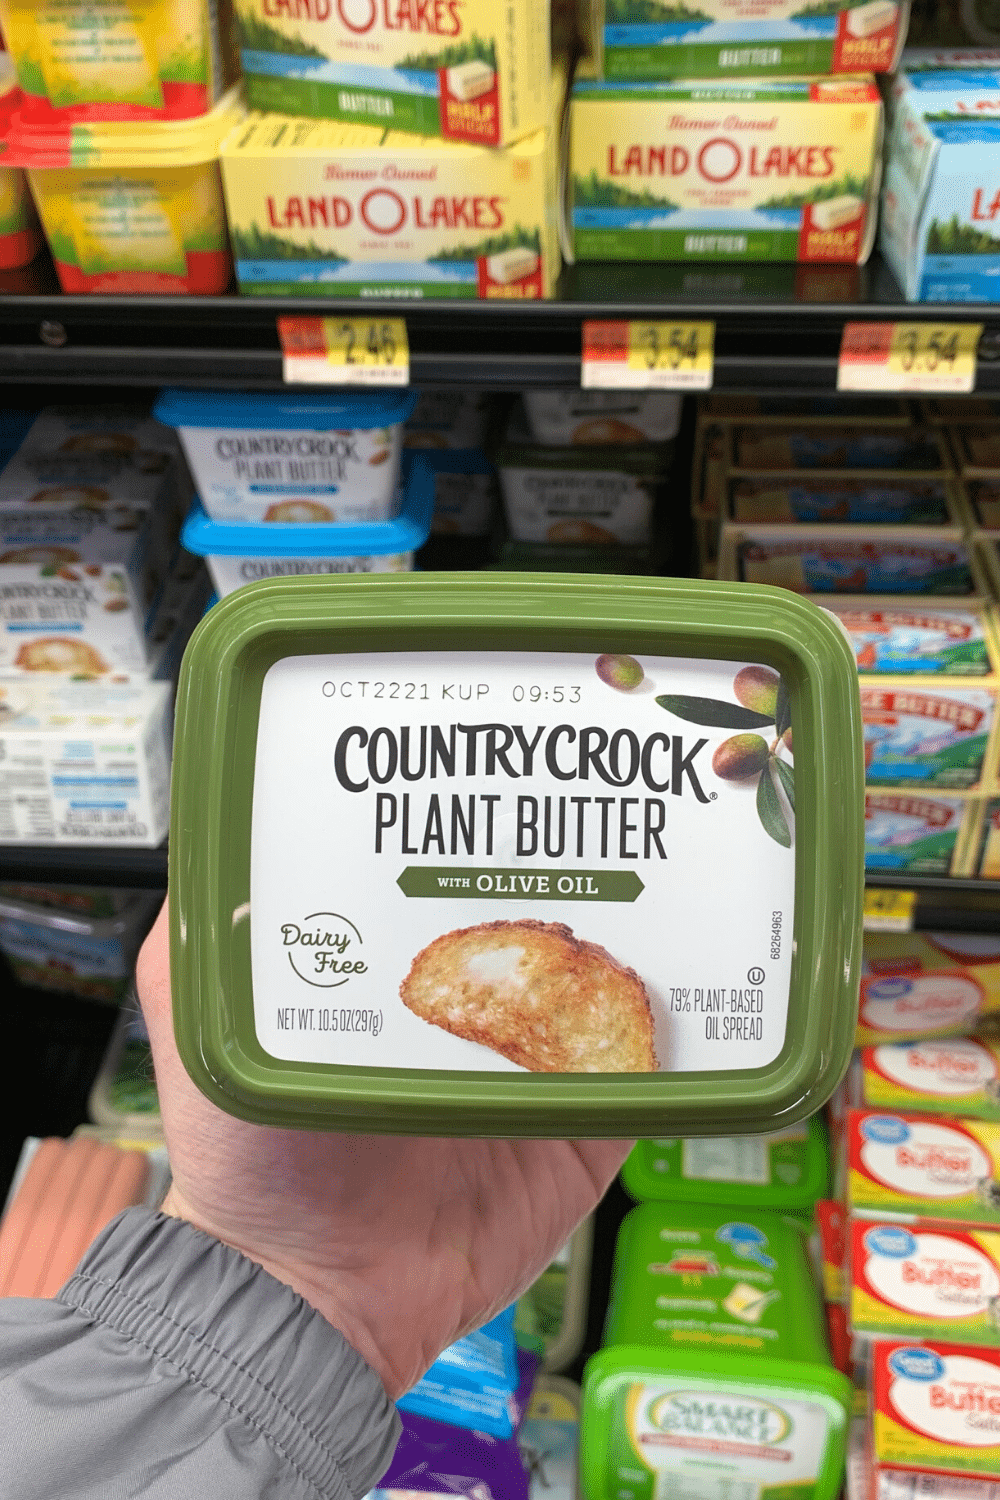 A hand holding Country crock plant butter with olive oil.